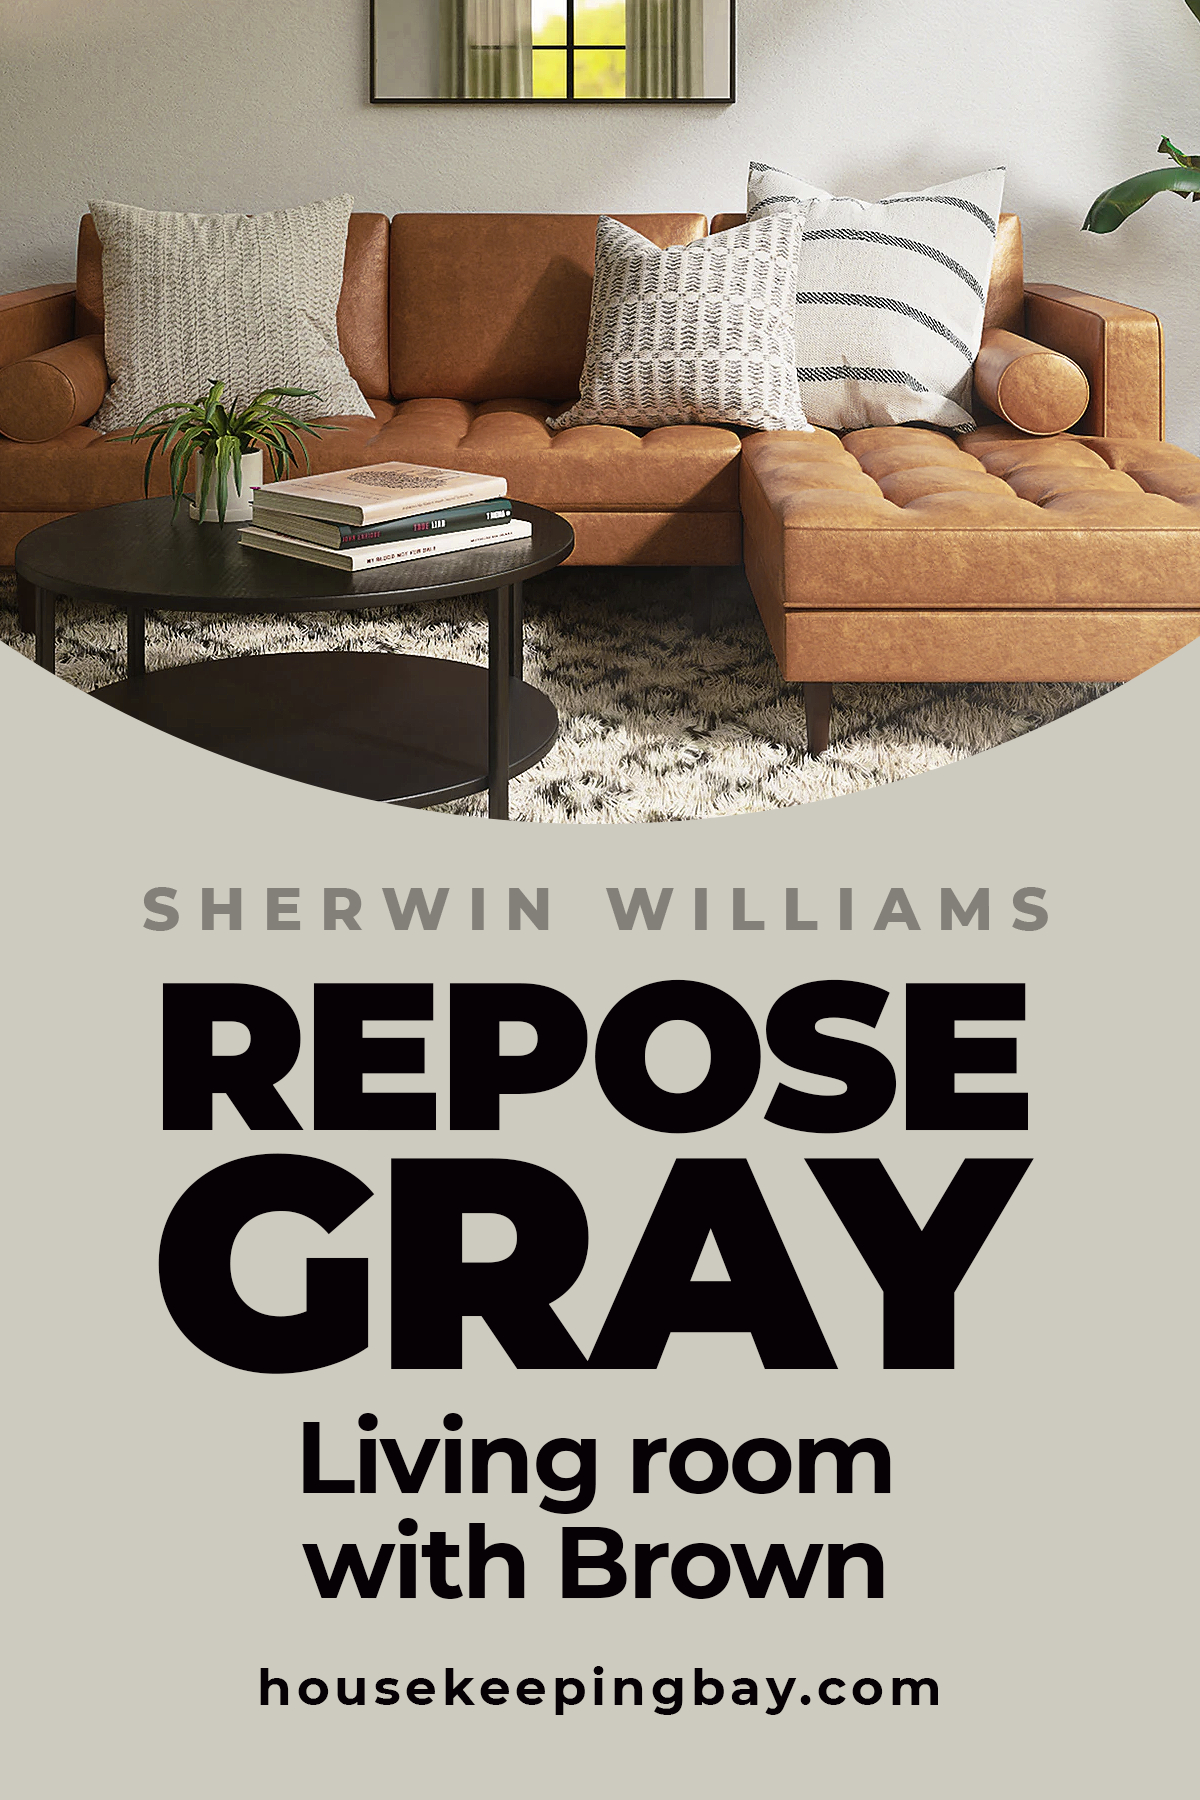 Repose Gray living room with Brown